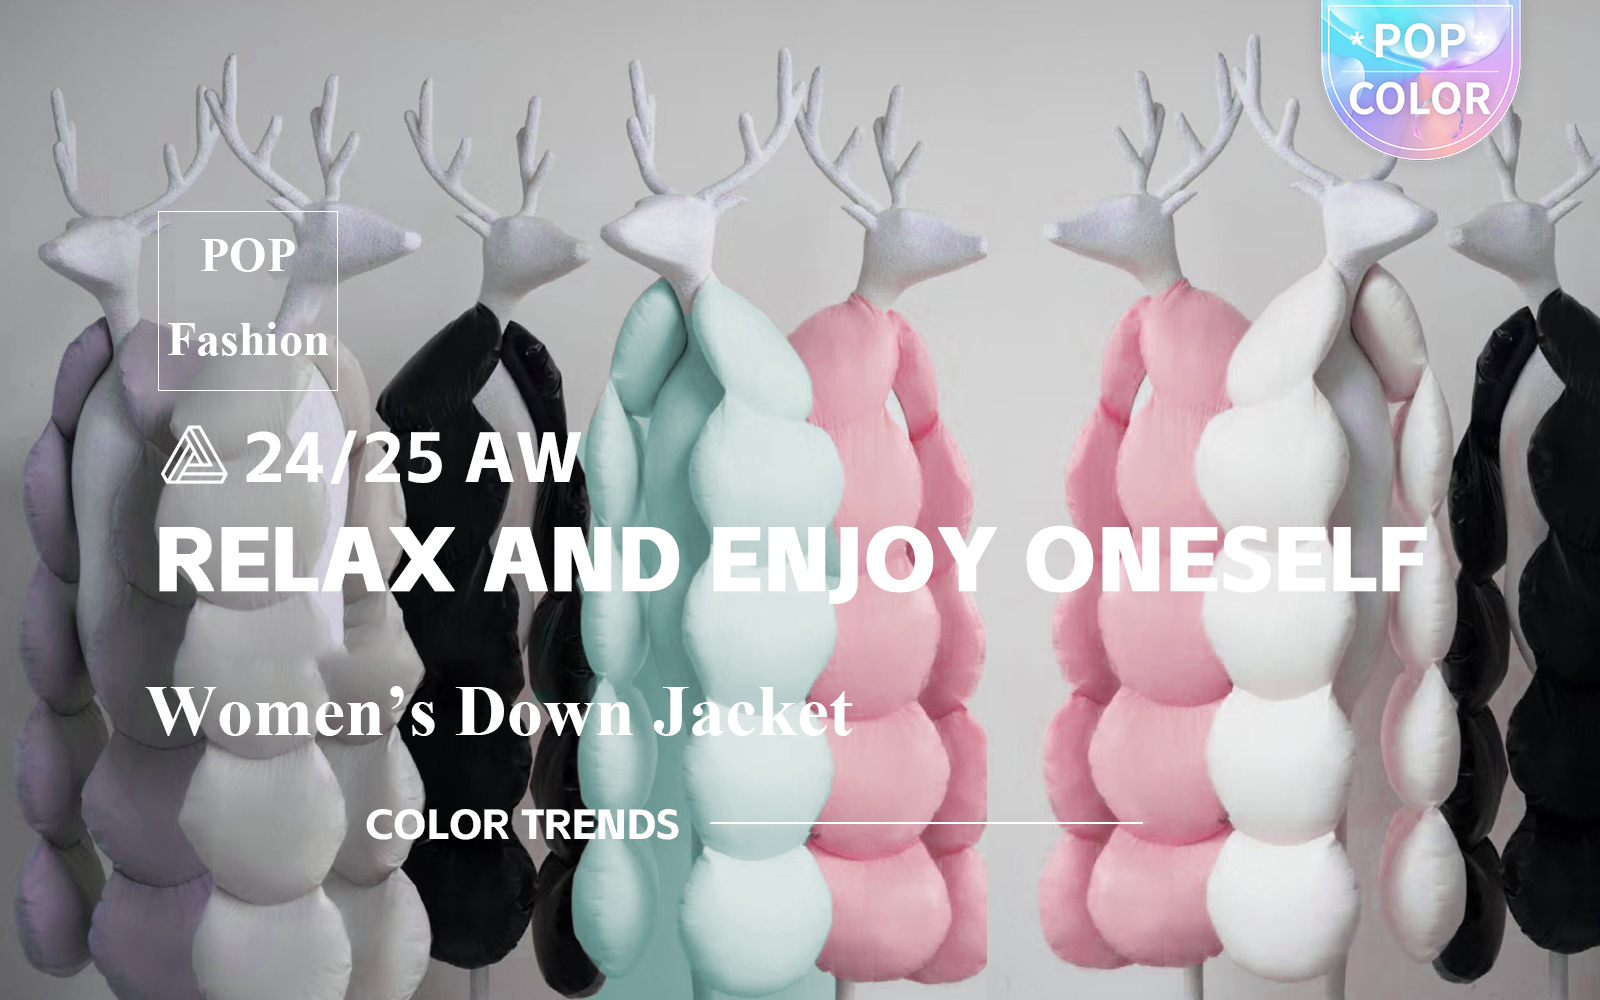 Relax & Enjoy Oneself -- A/W 24/25 Color Trend for Women's Down Jacket